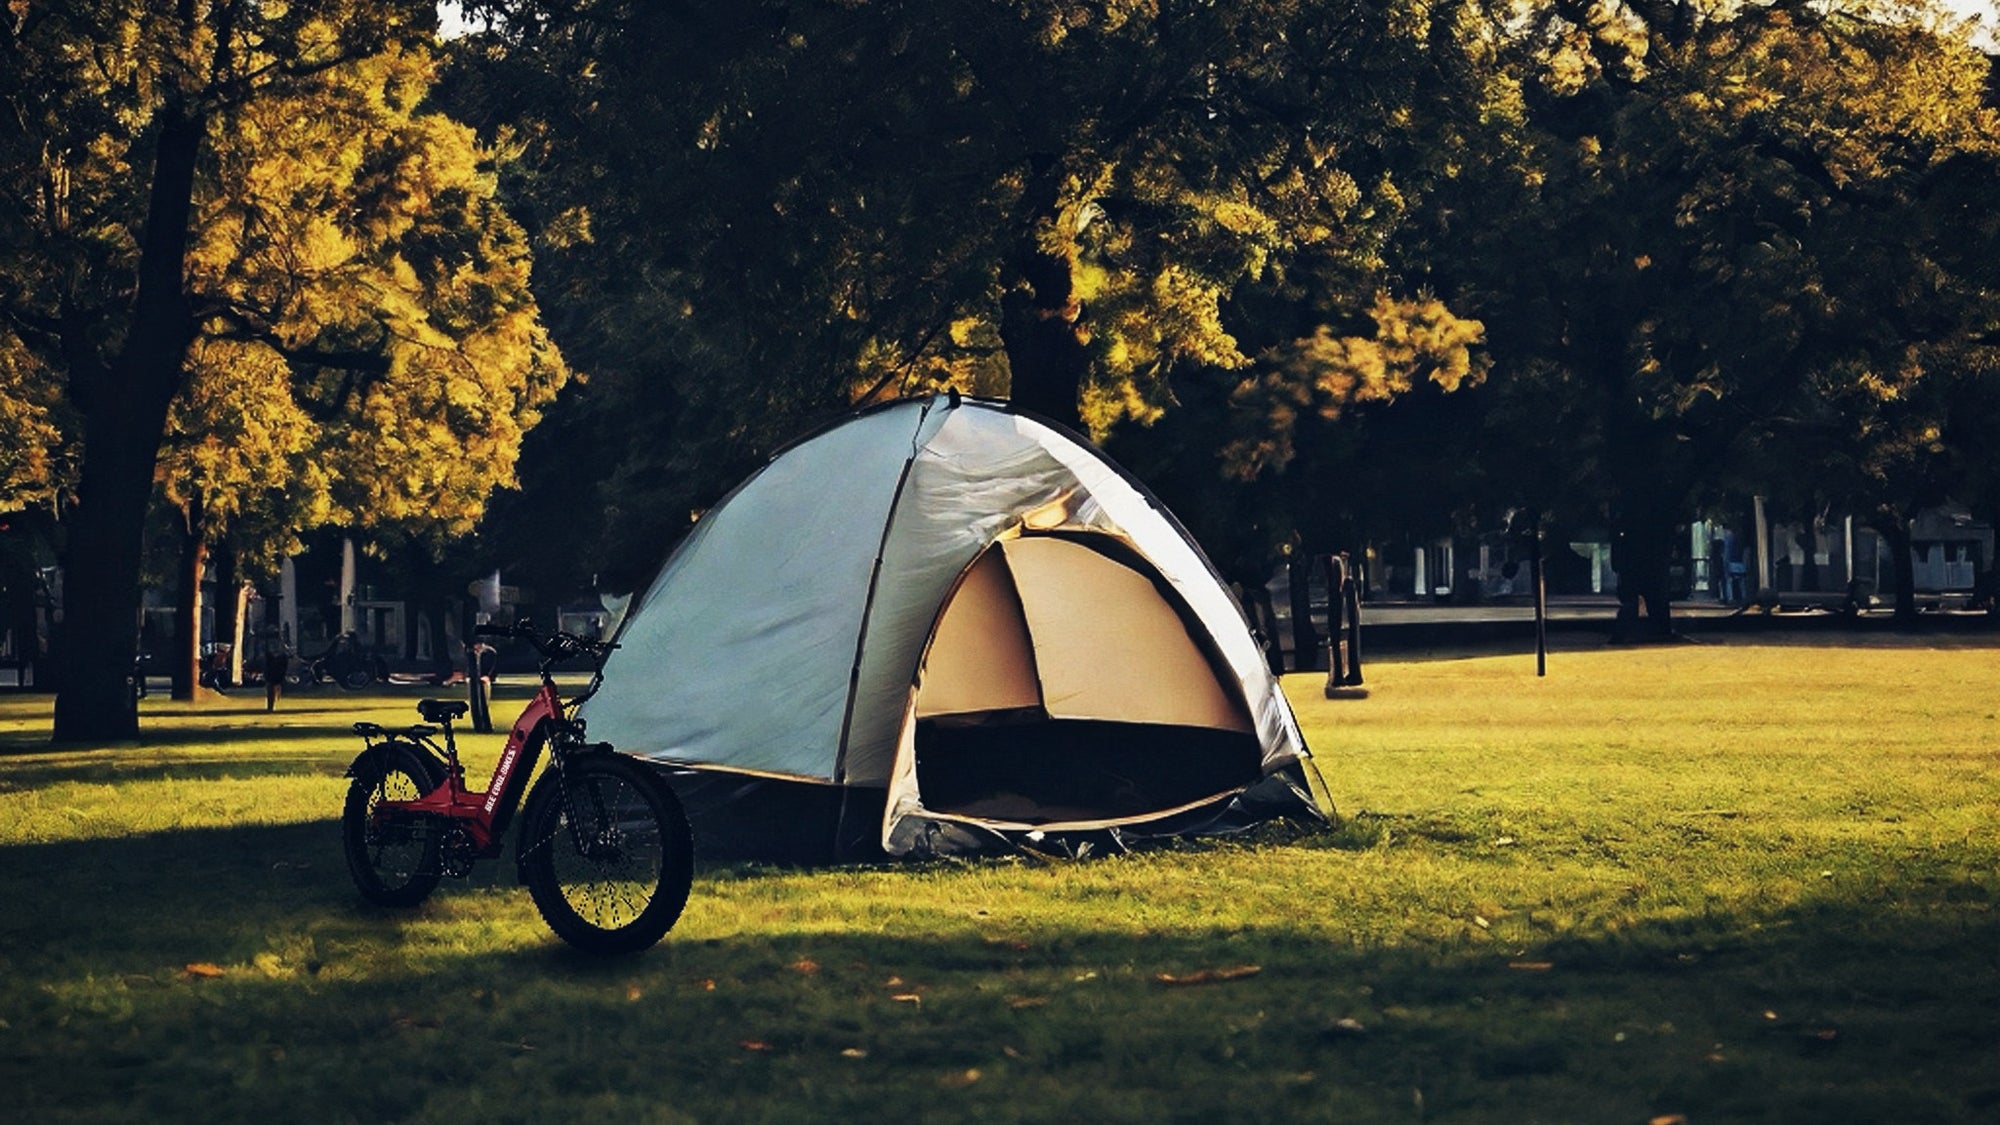 Embrace the Spring Camping Adventure with "4+2" - A New Mode of Transportation